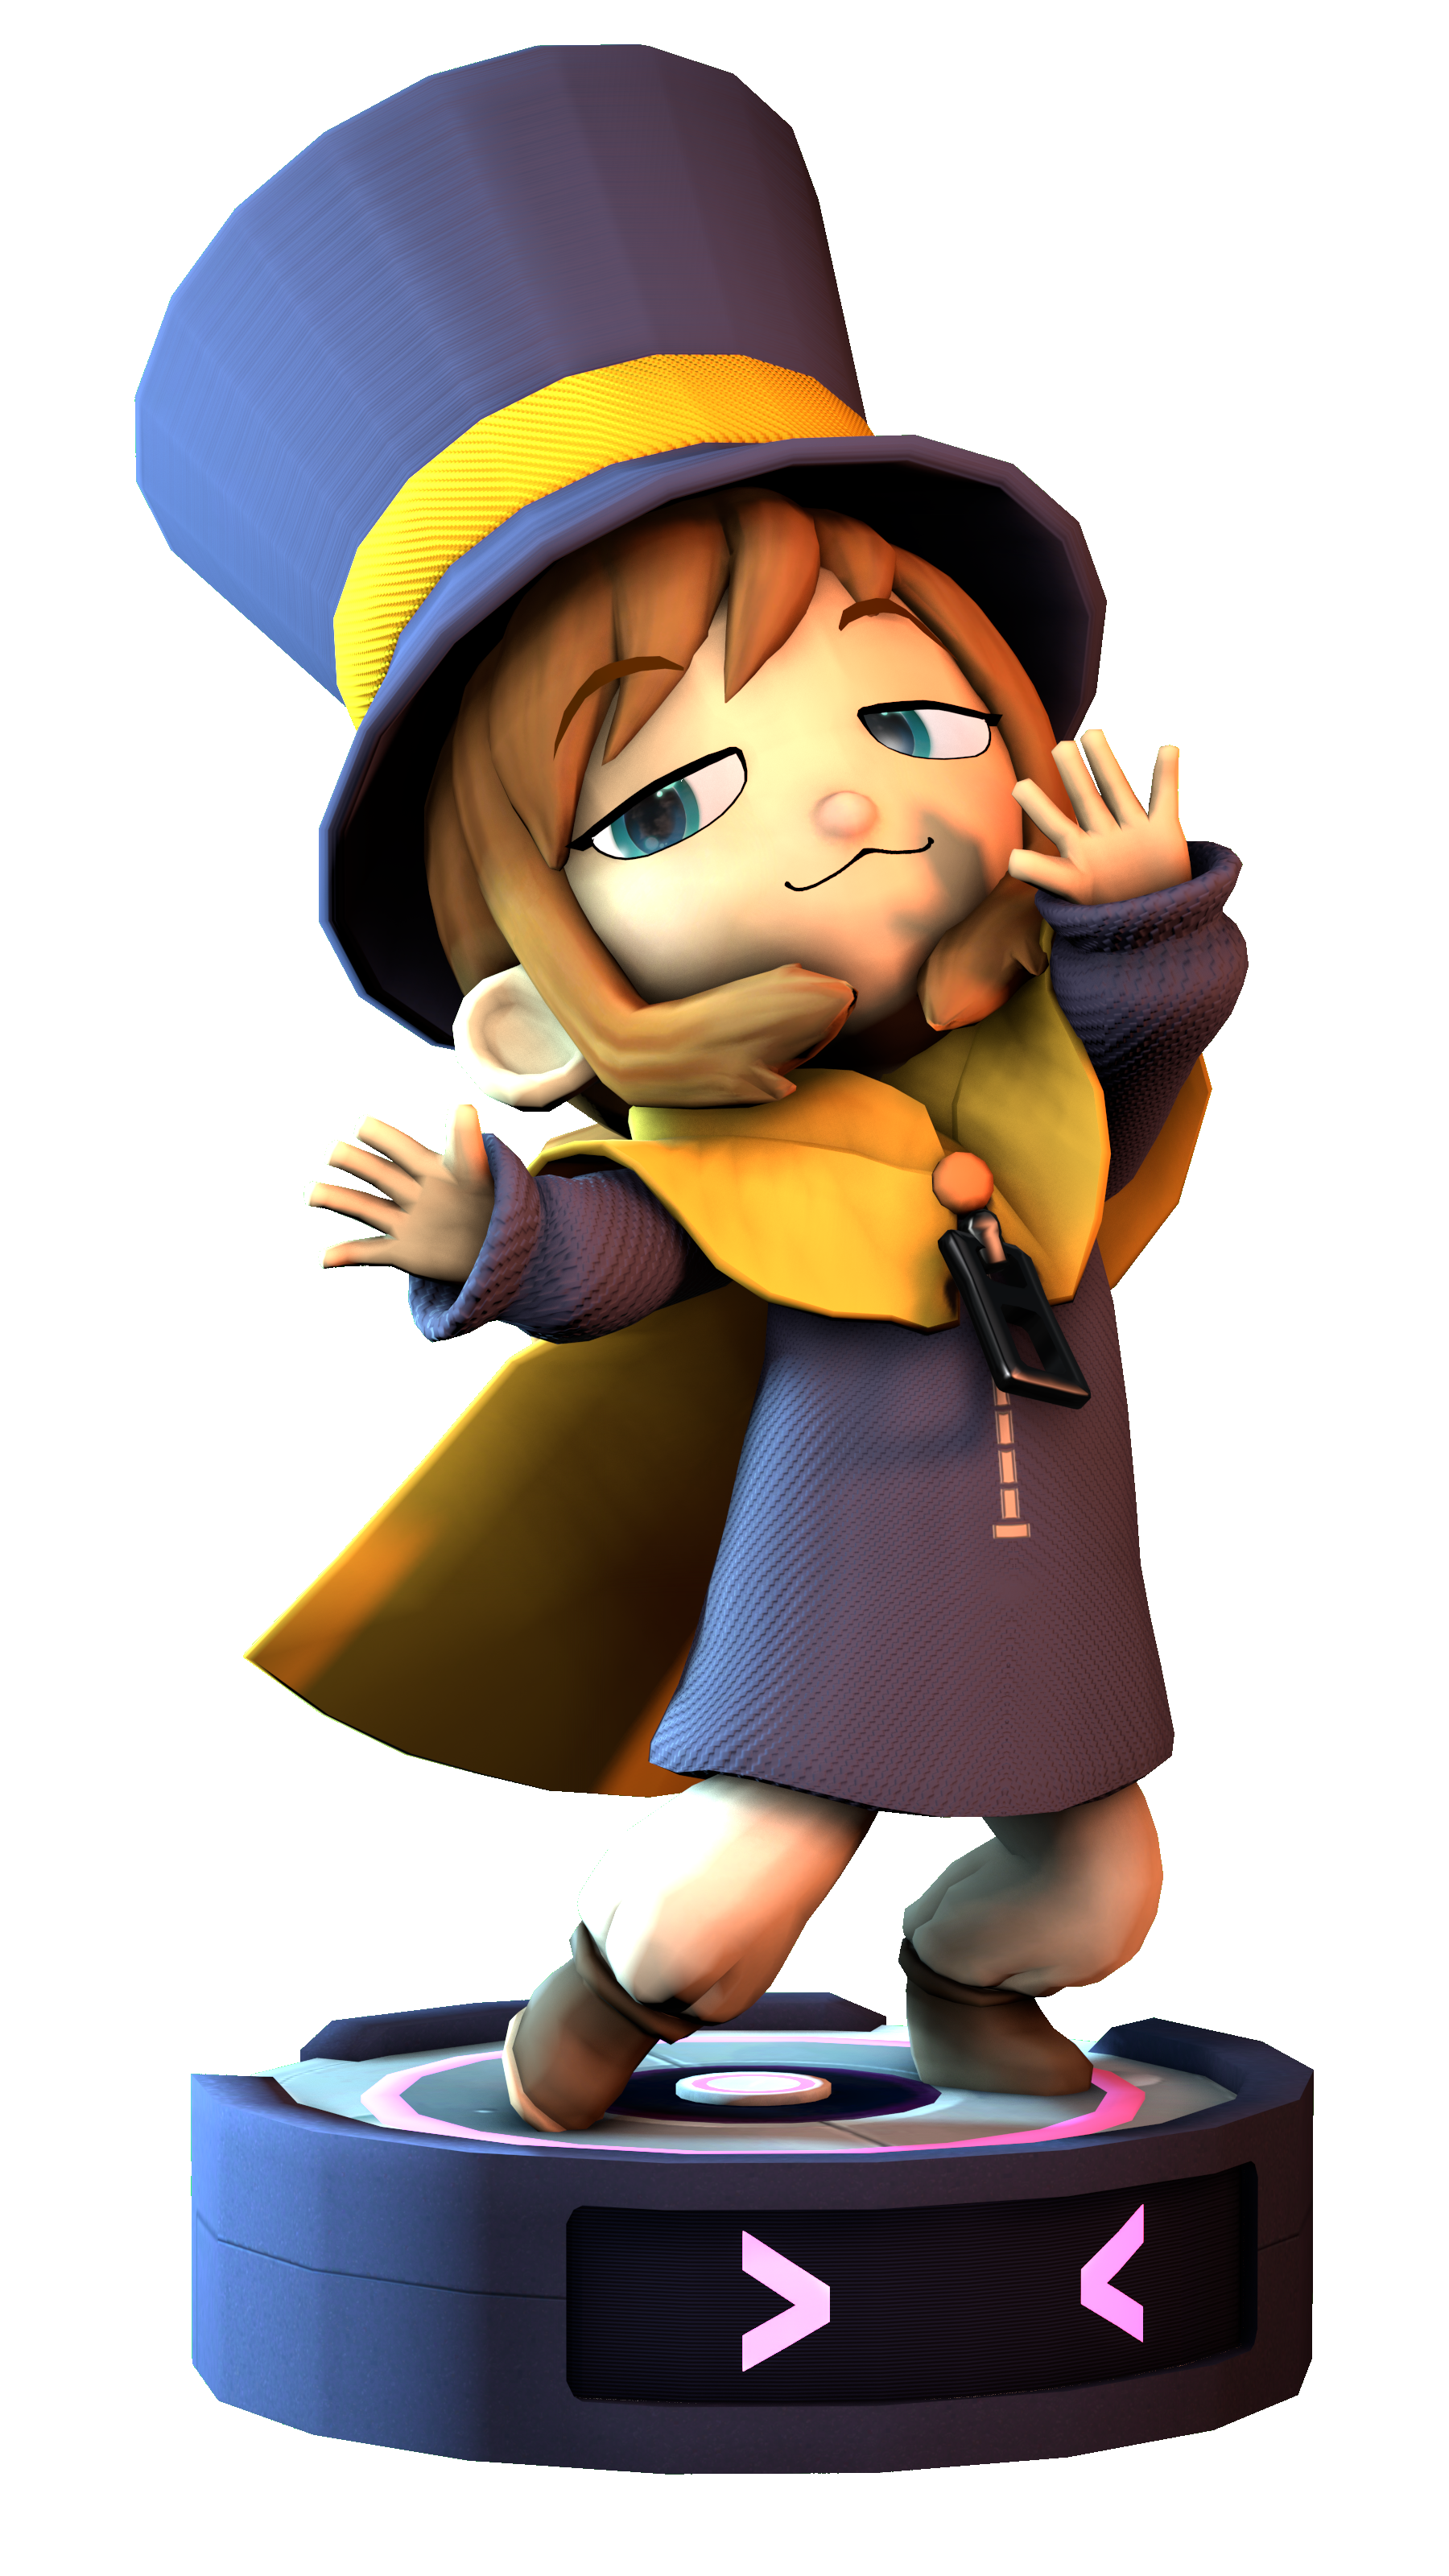 The 4 Hat Kids of the Time (A Hat in Time) by ofihombre on DeviantArt